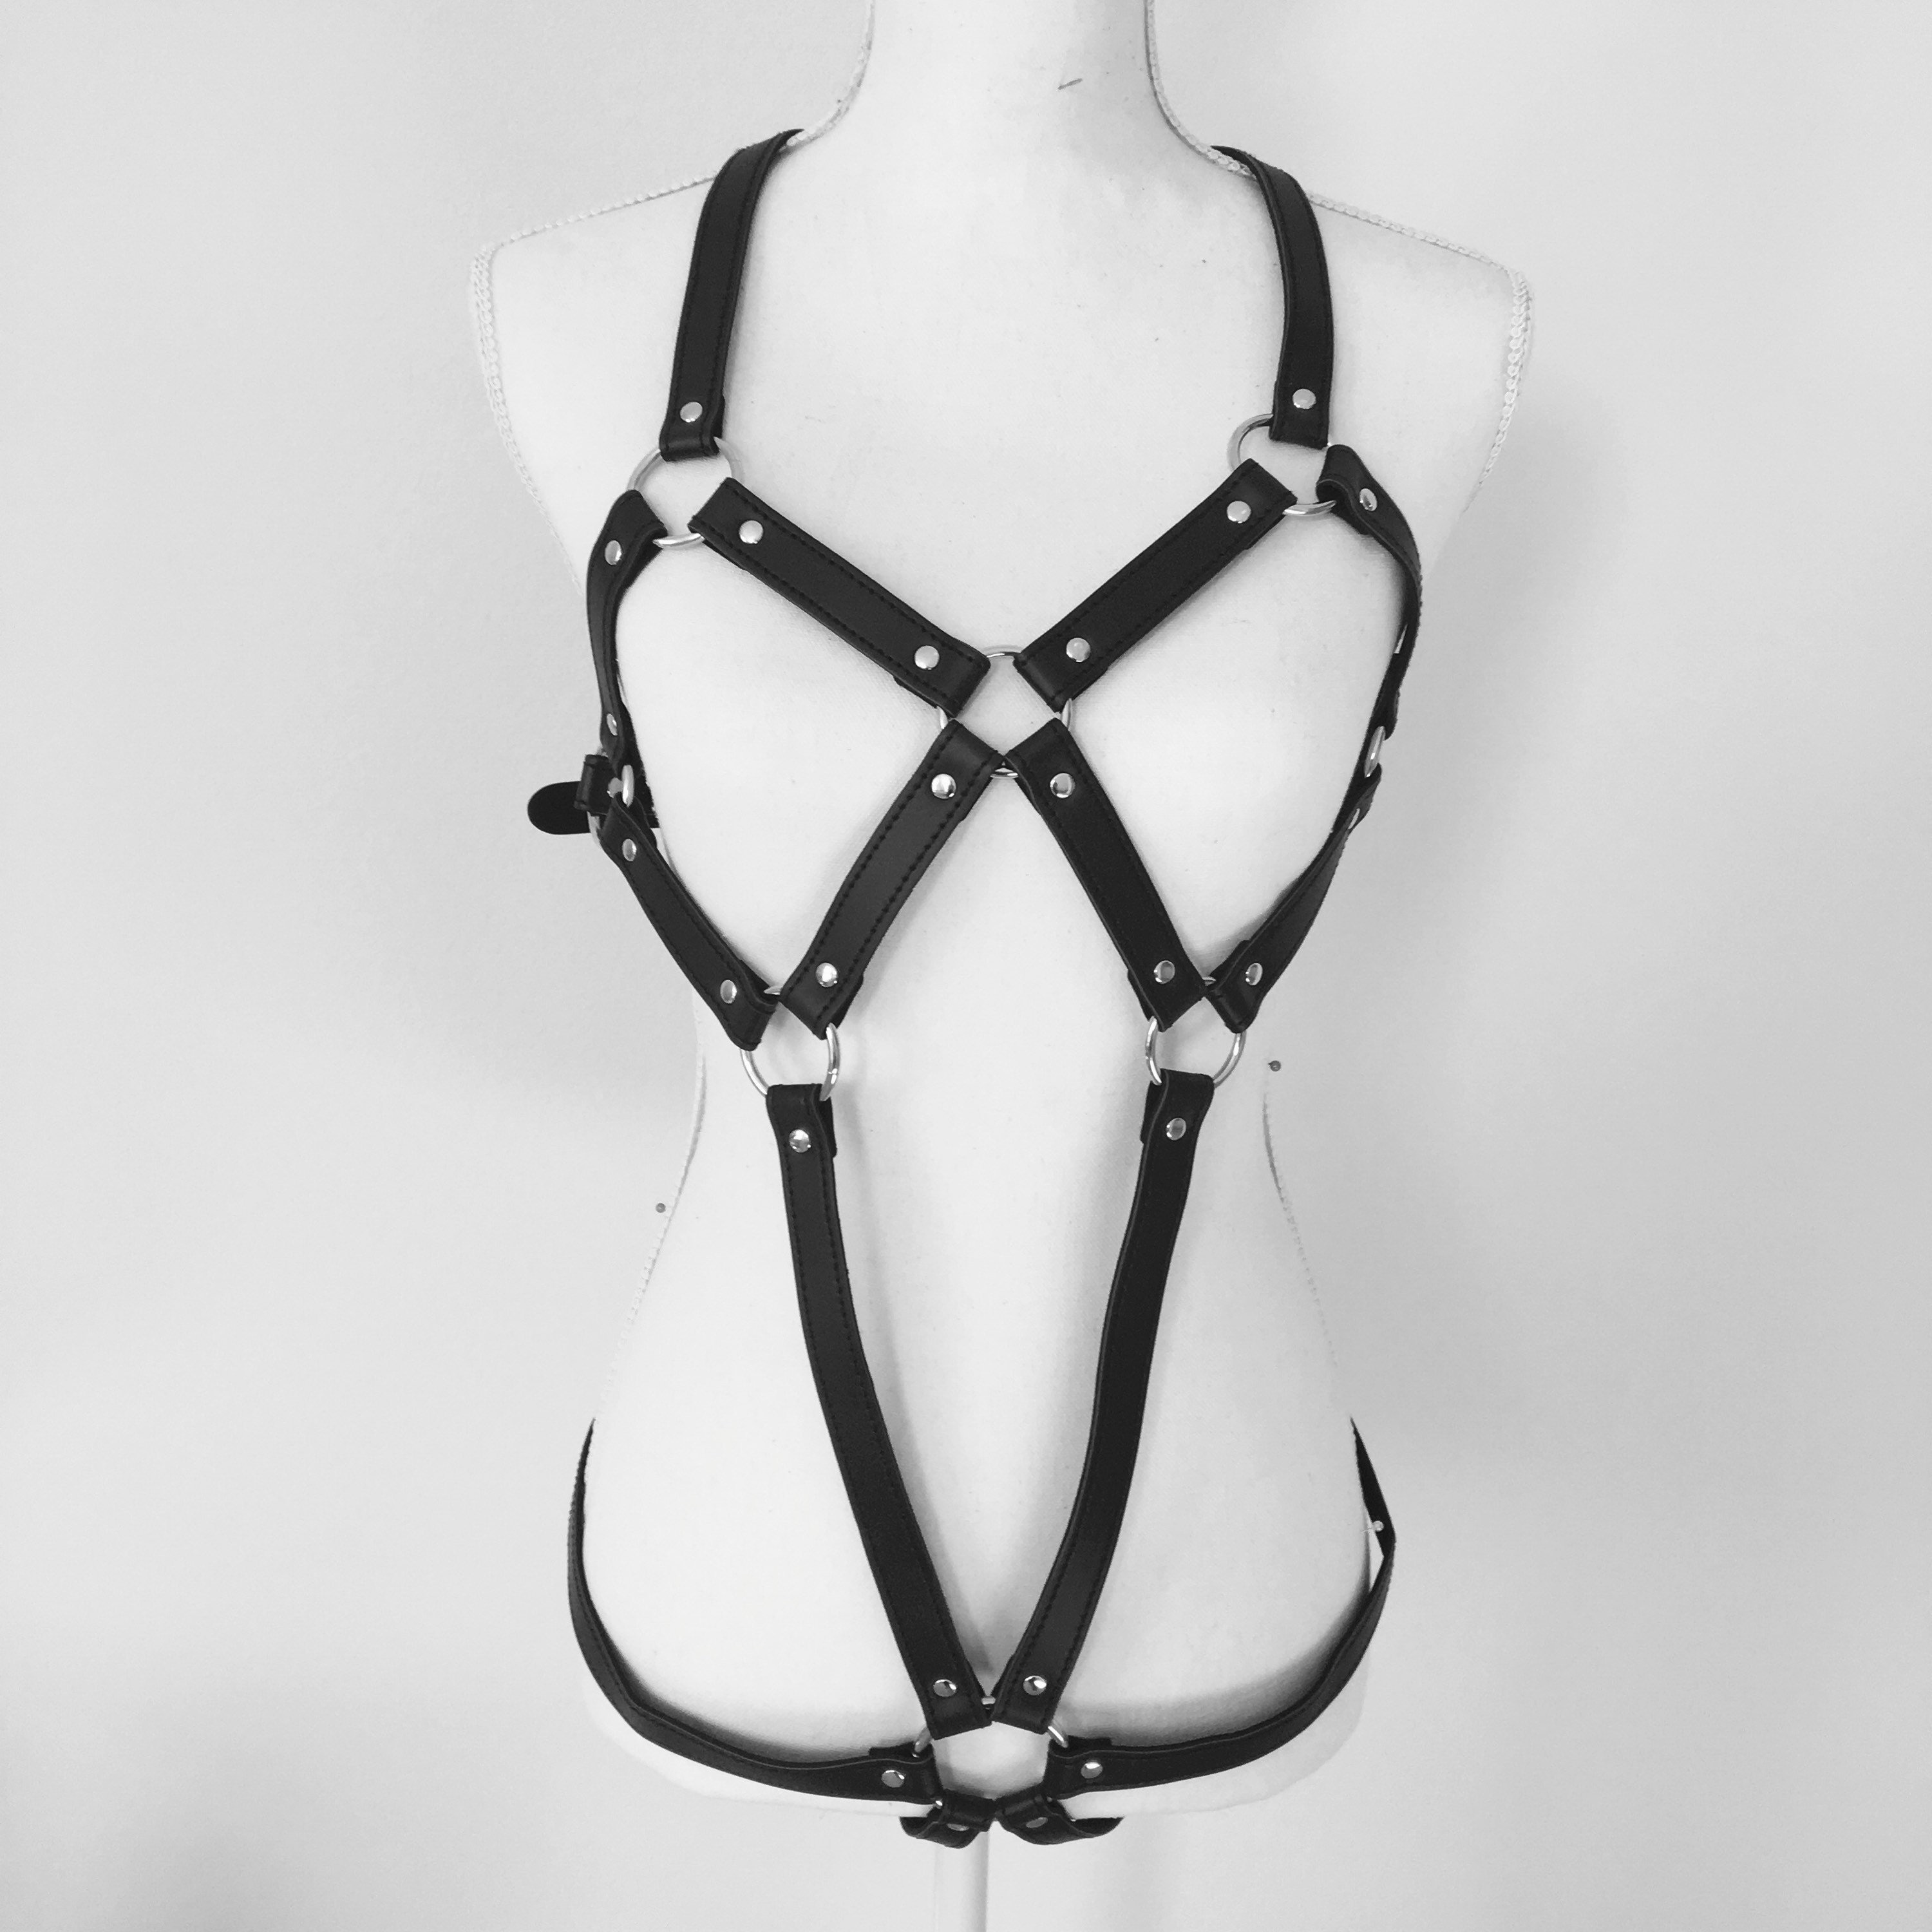 Mature-full Body Harness With Optional Hook/sex Hook BDSM image